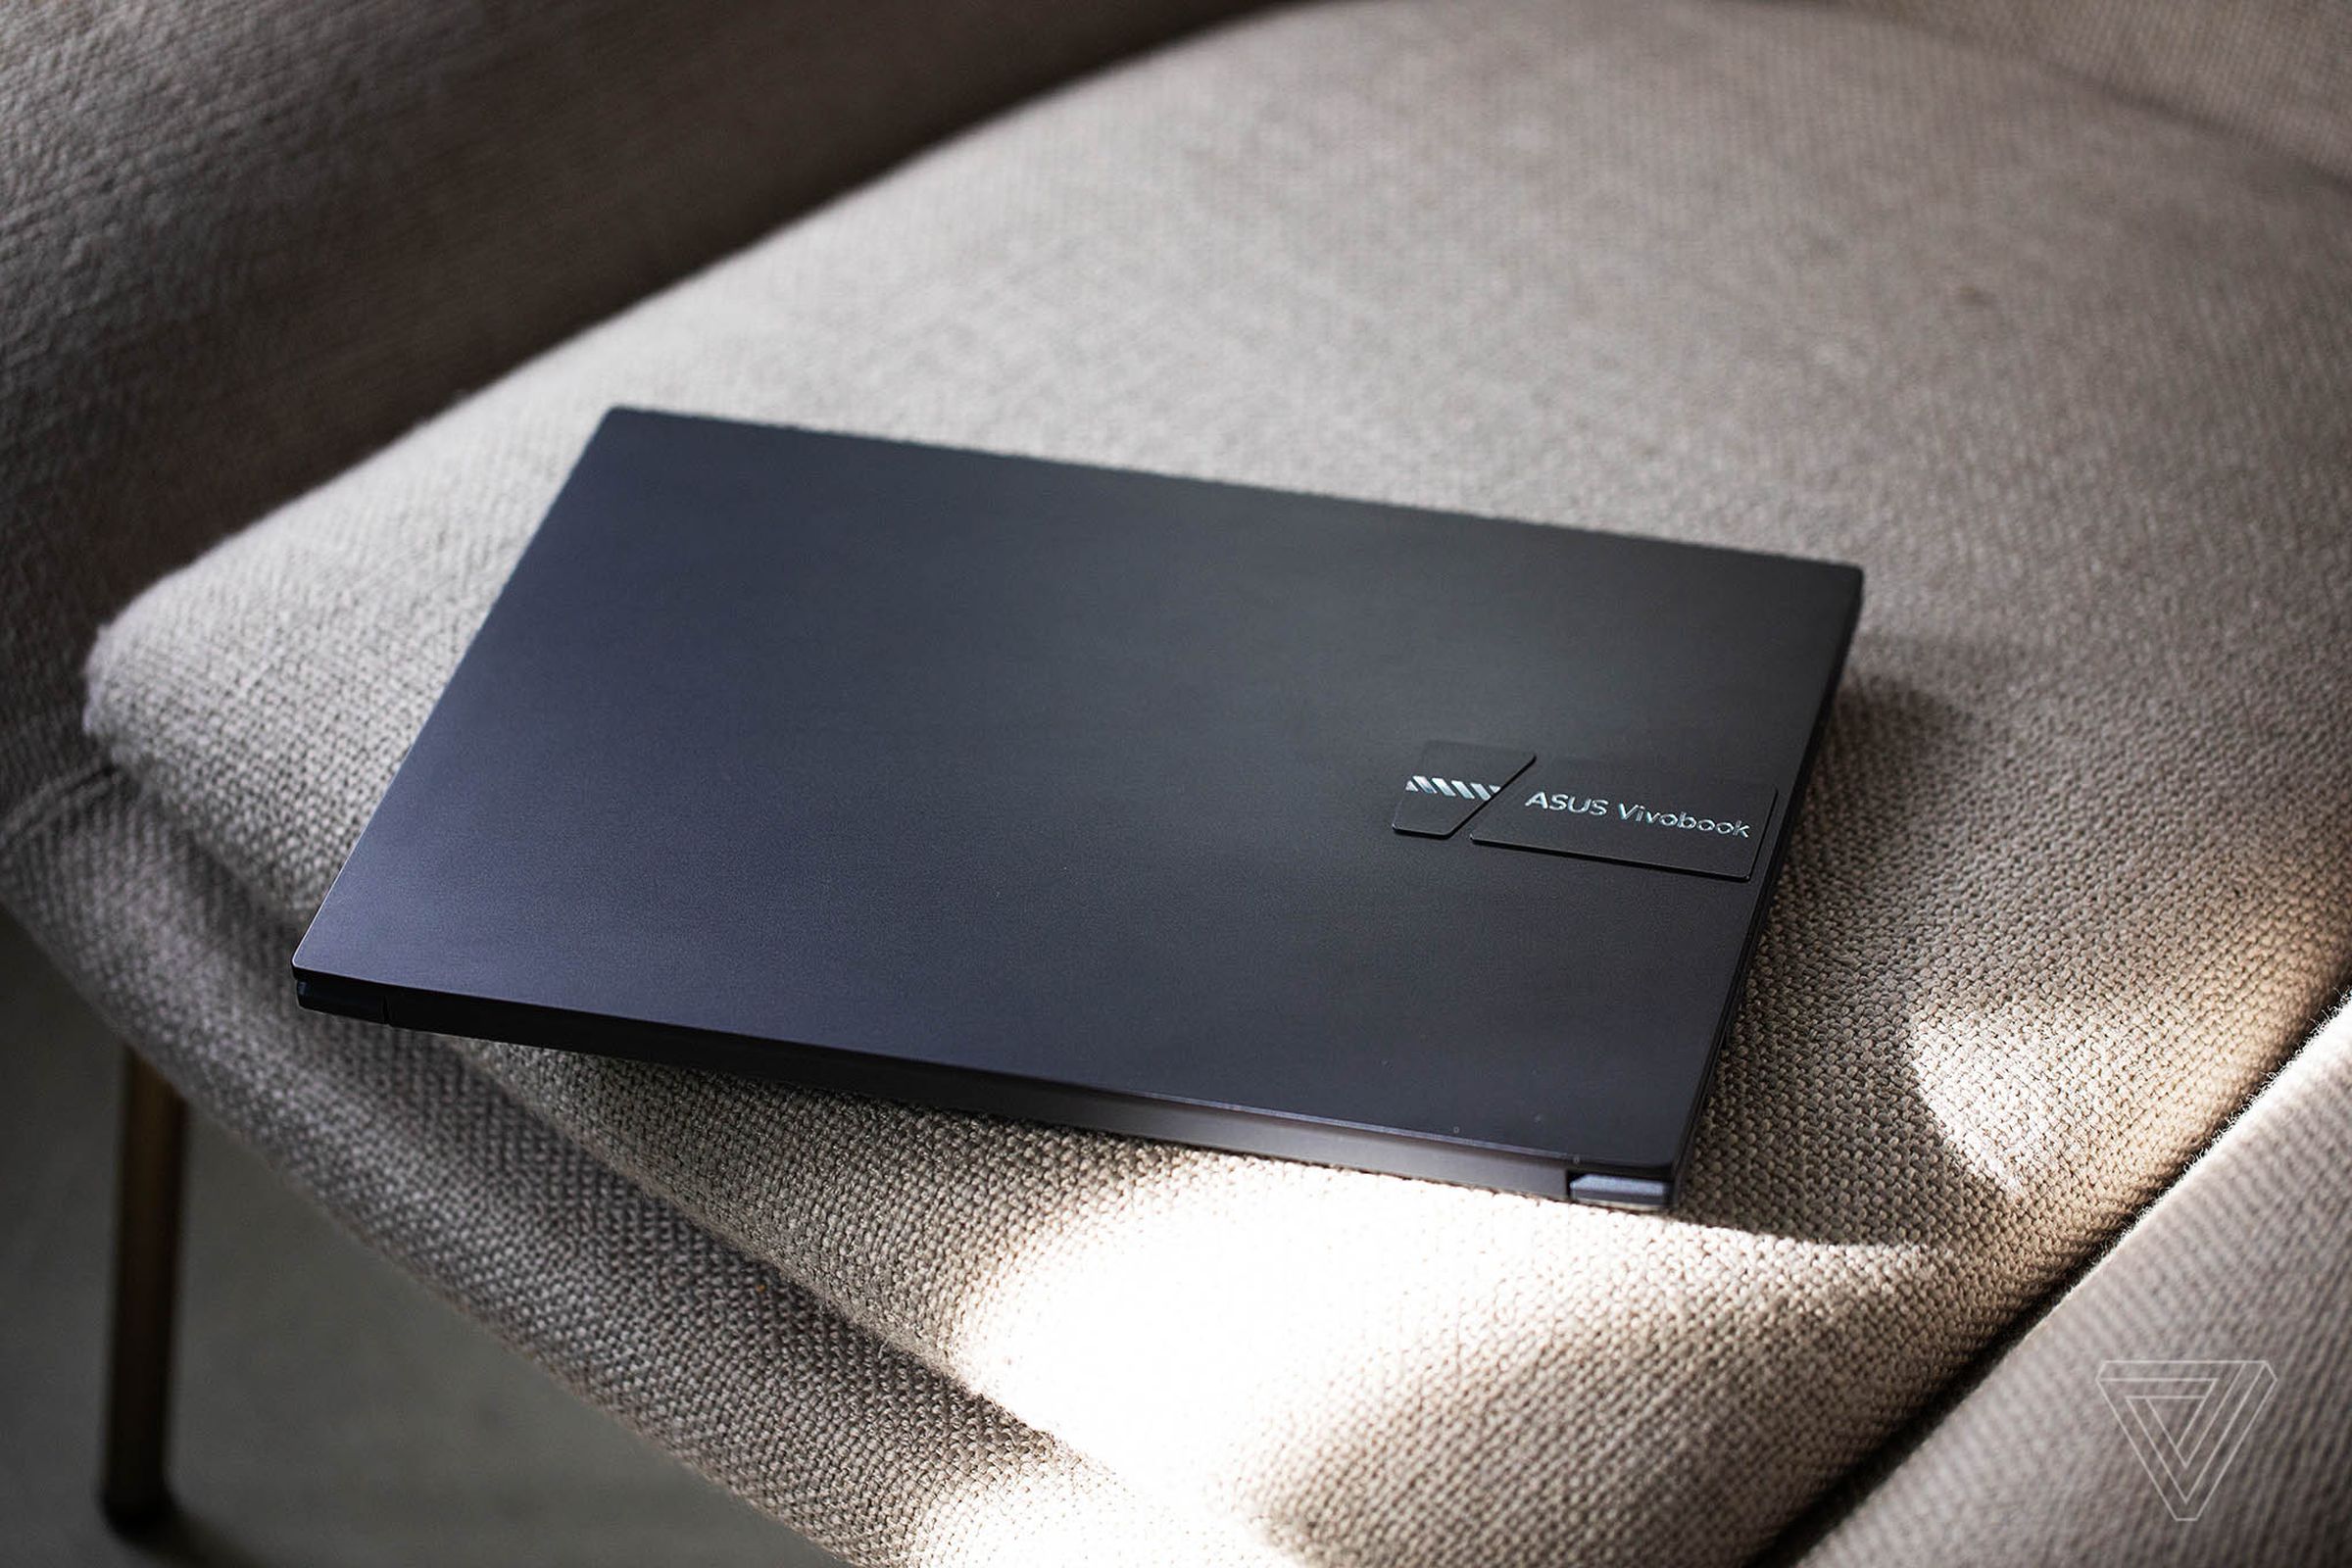 The Asus Vivobook Pro 14 closed, seen from above, on a white plush chair.